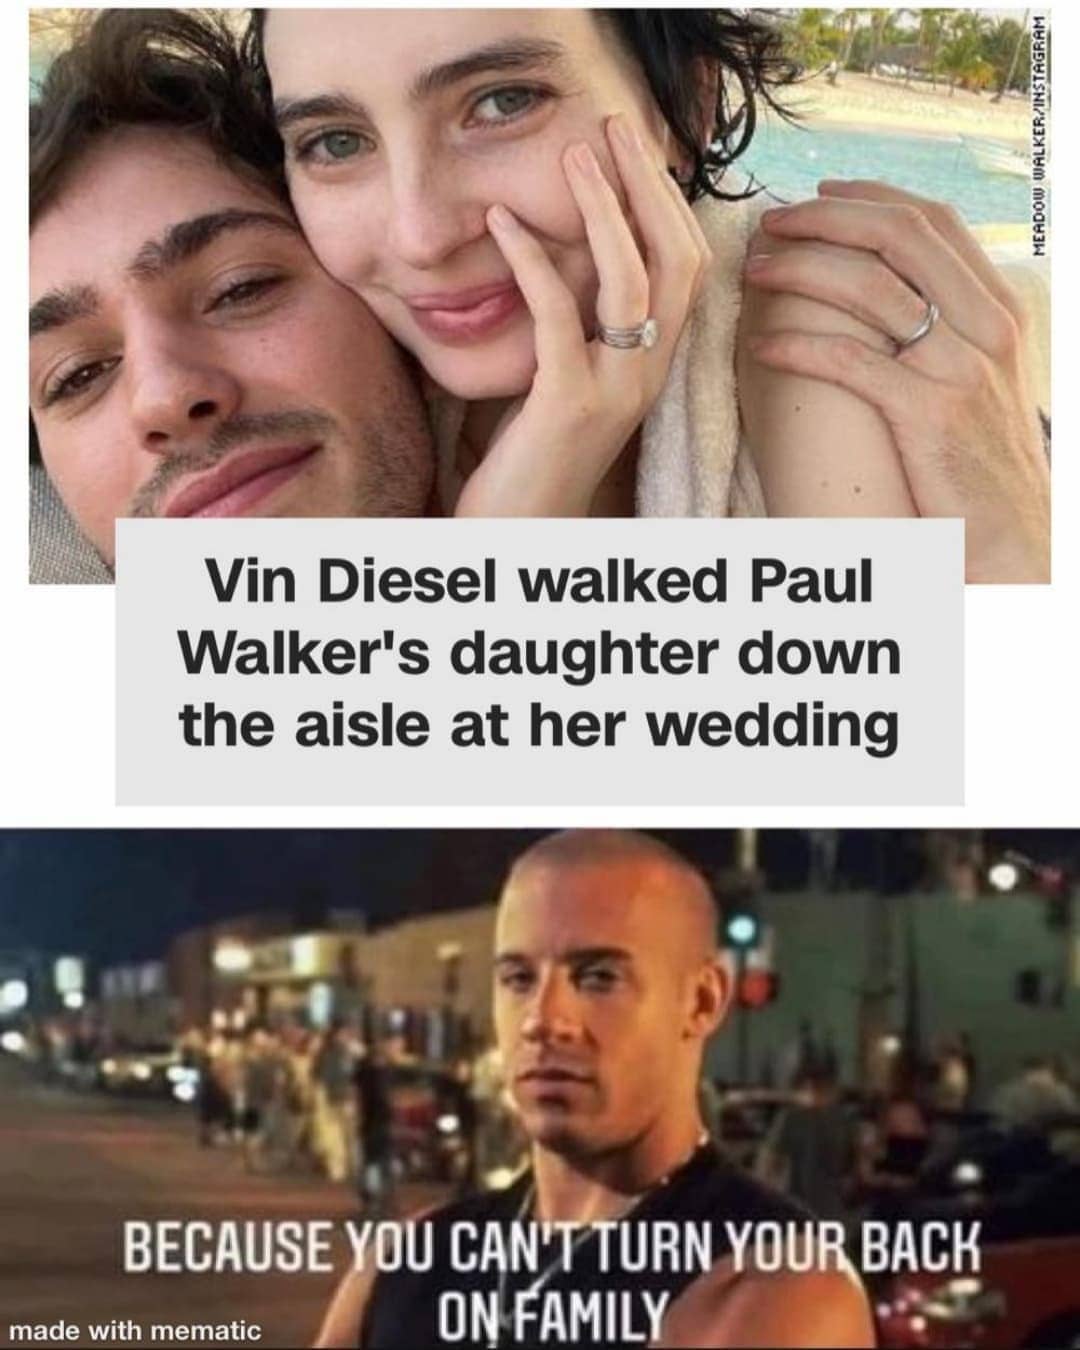 Vin Diesel walked Paul Walker's daughter down the aisle at her wedding.  Because you can't turn your back on family.